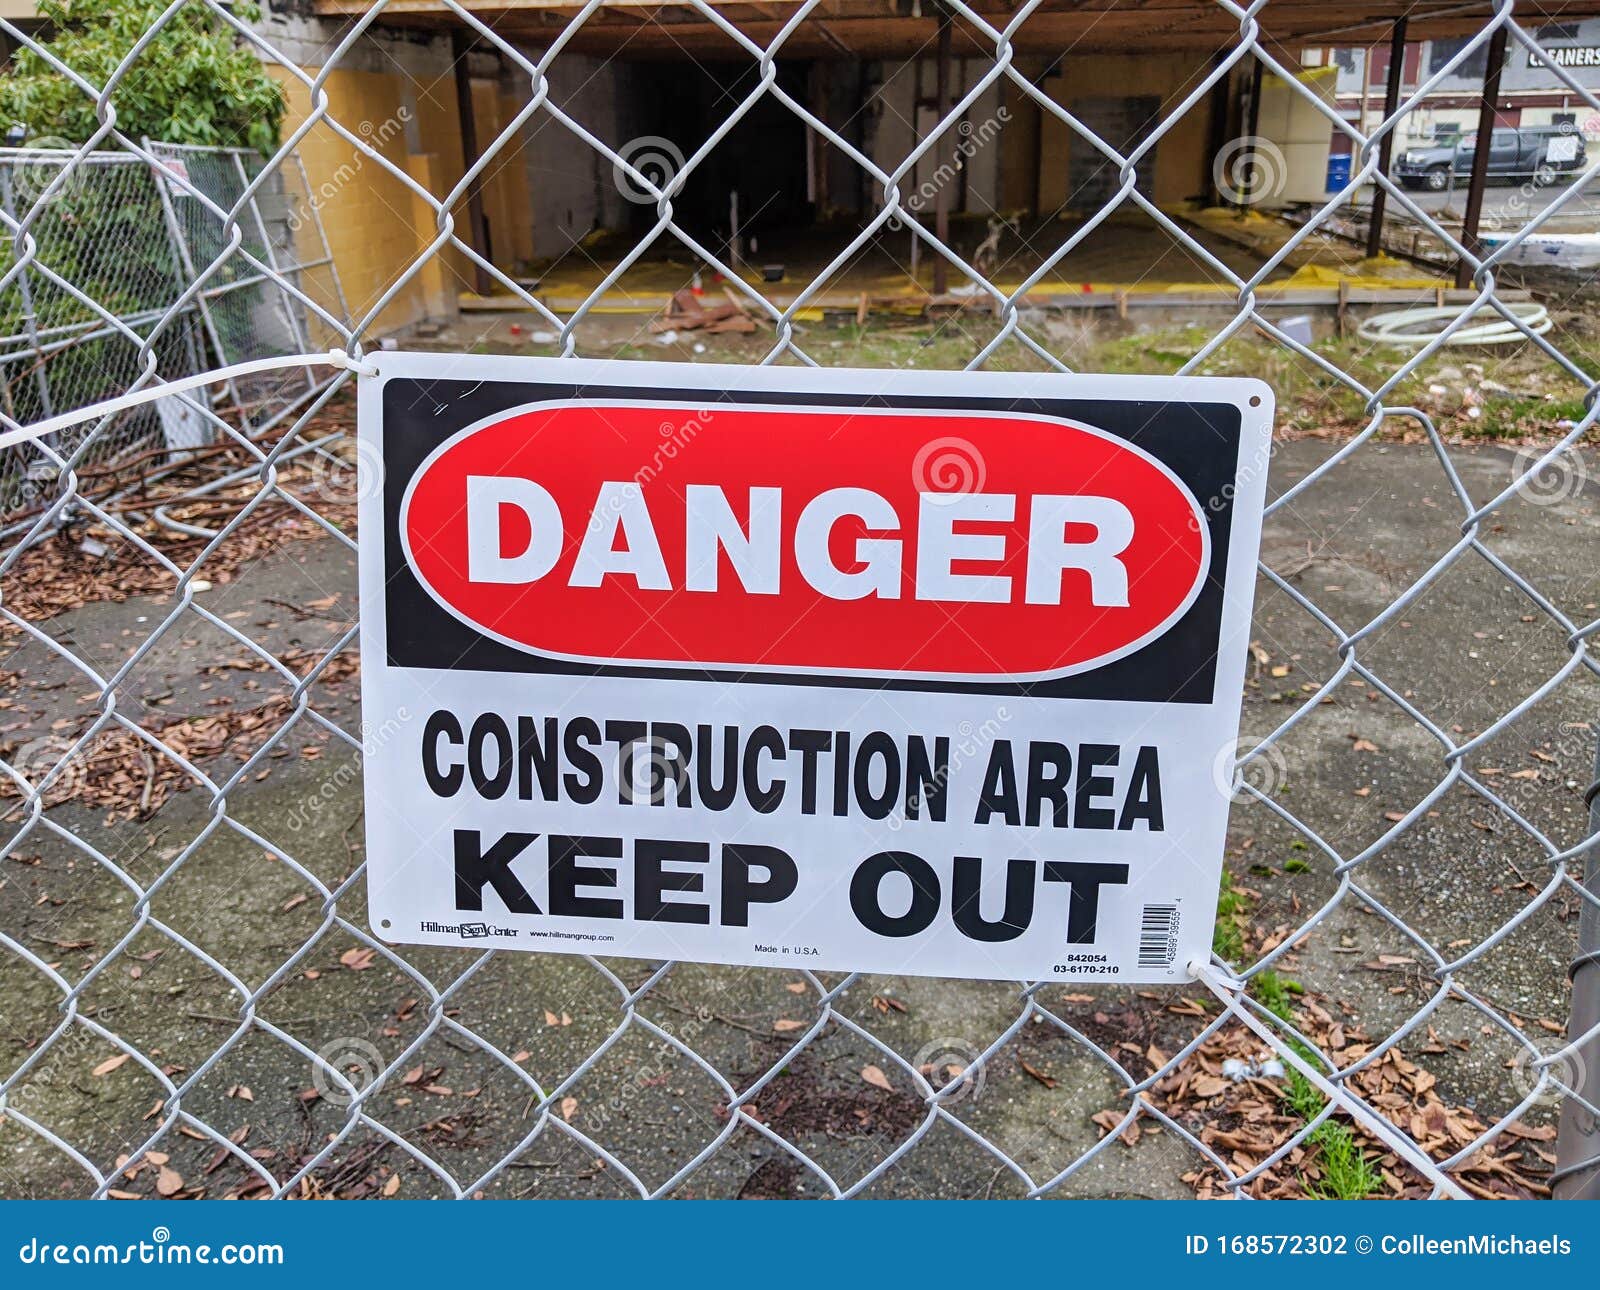 Danger Construction Area Sign Near The Bellevue Way And NE 2nd Street Construction Sites In The